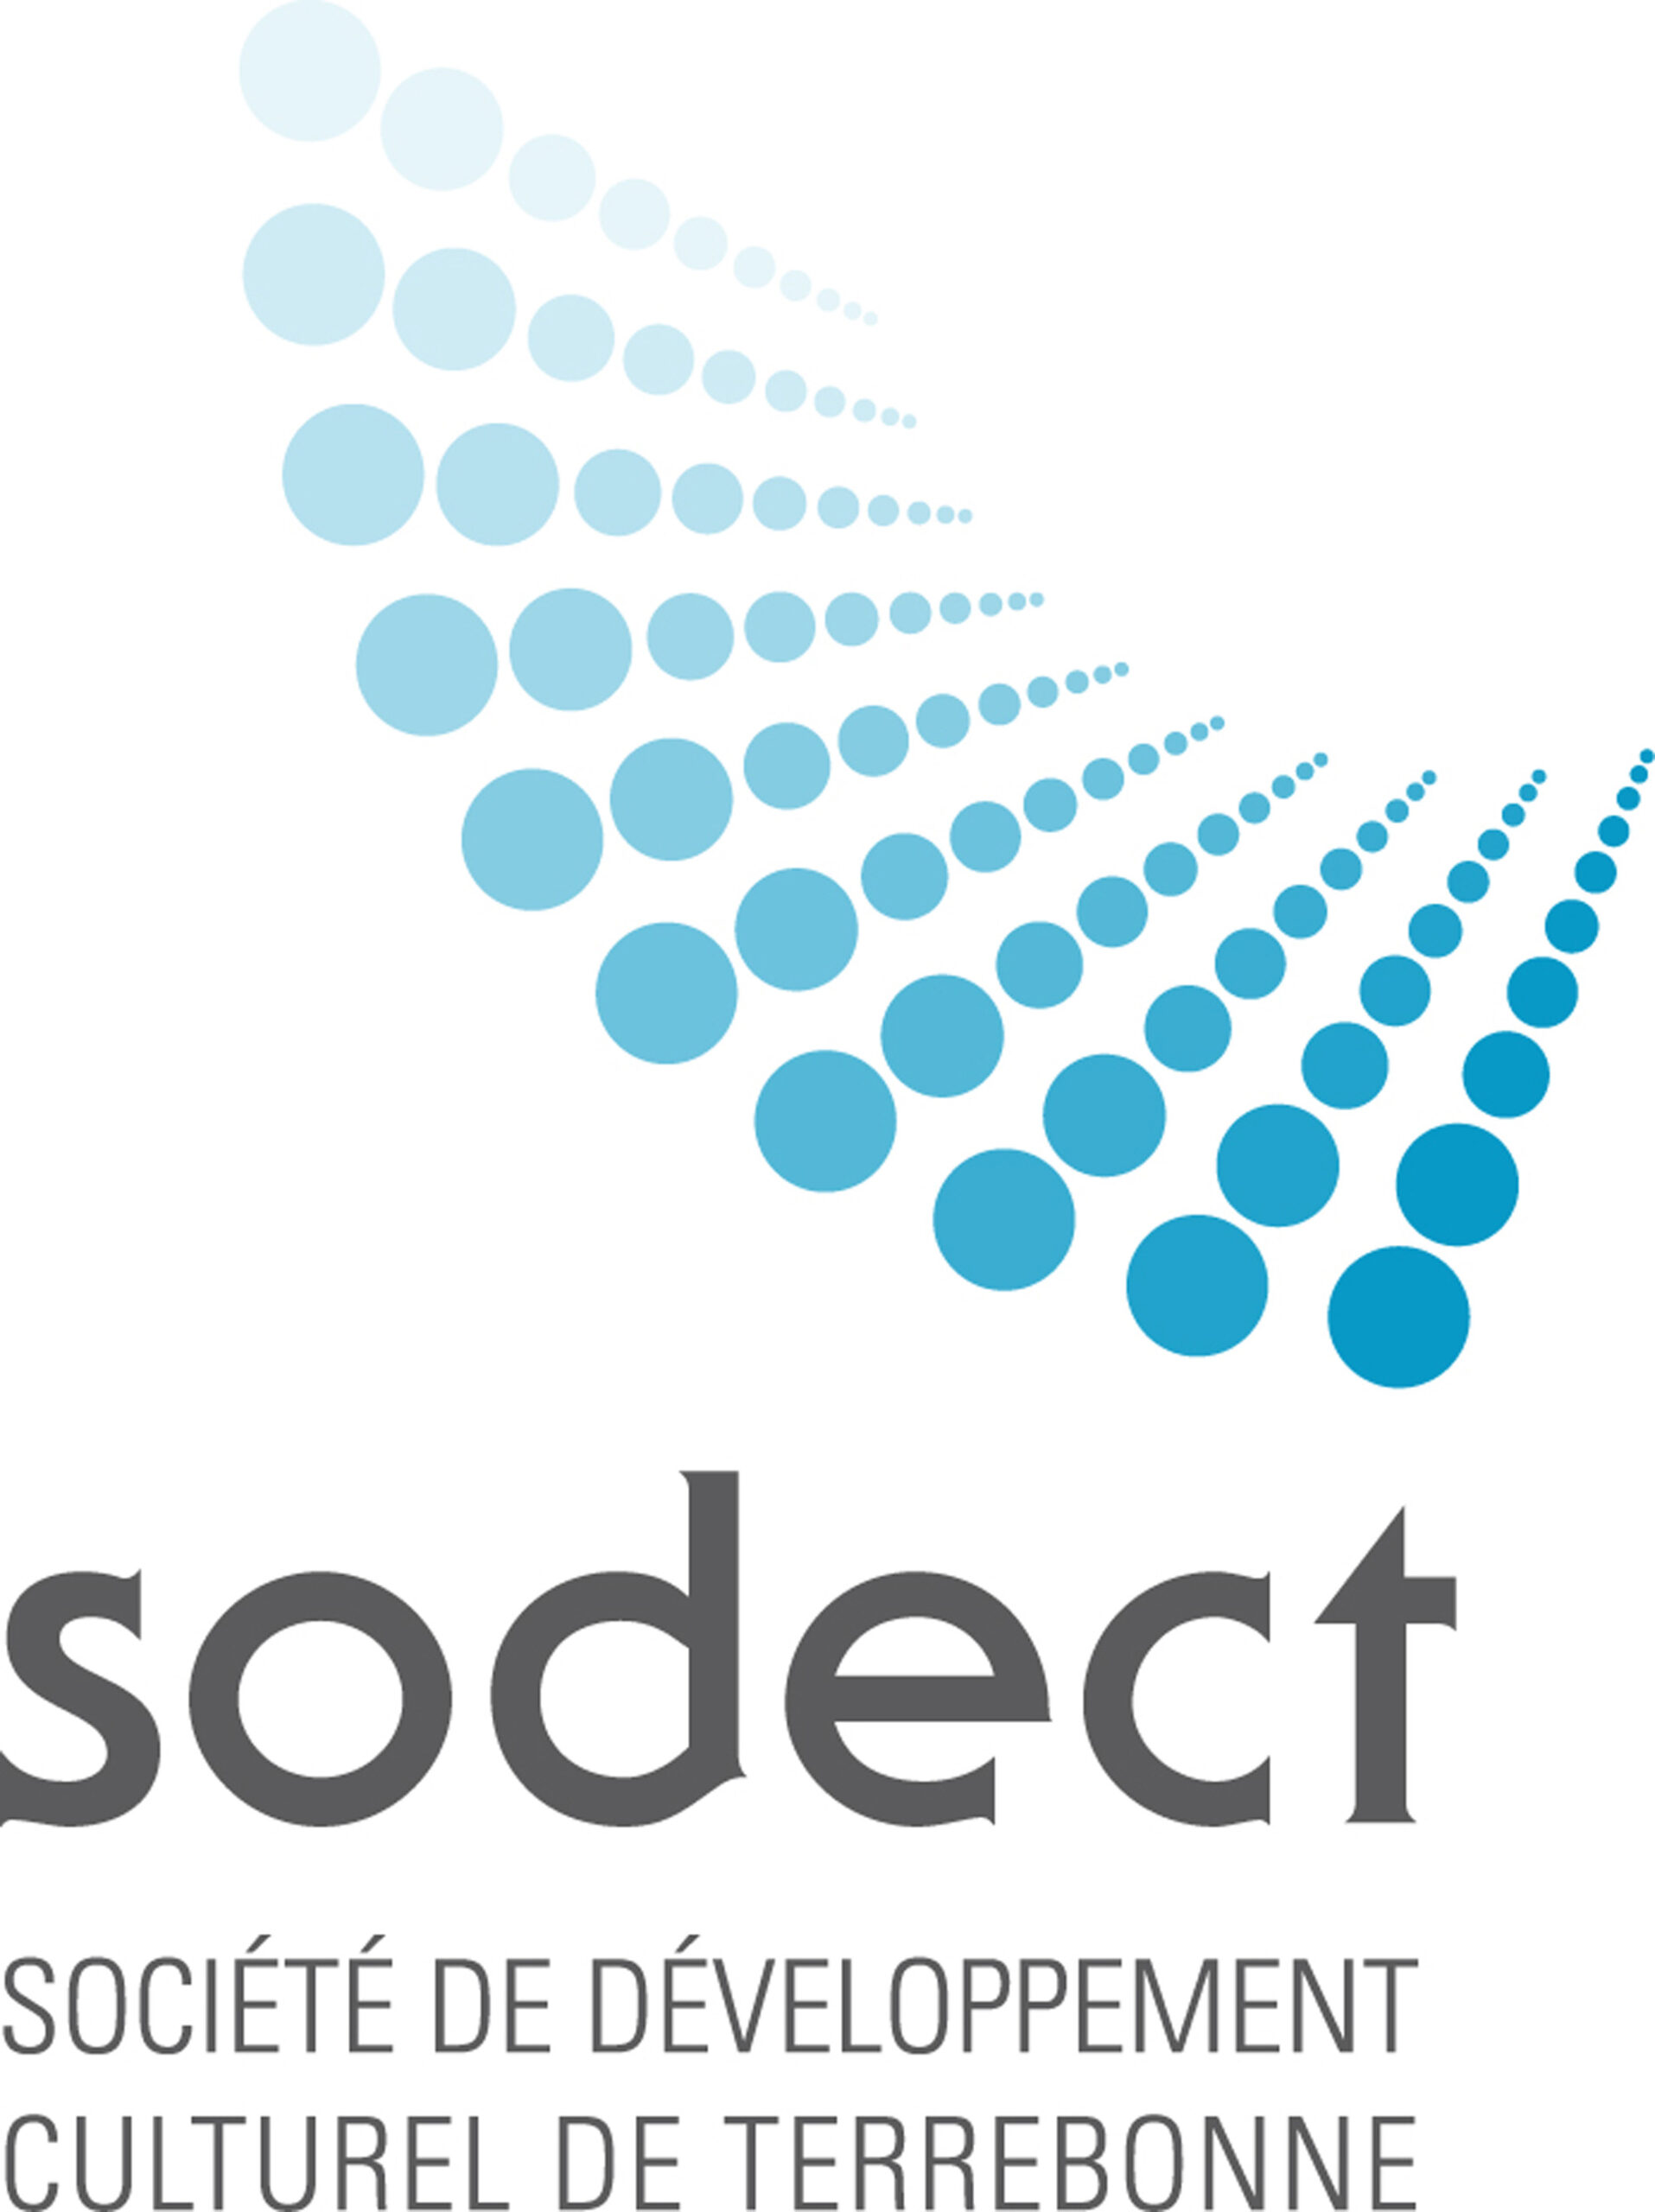 SODECT